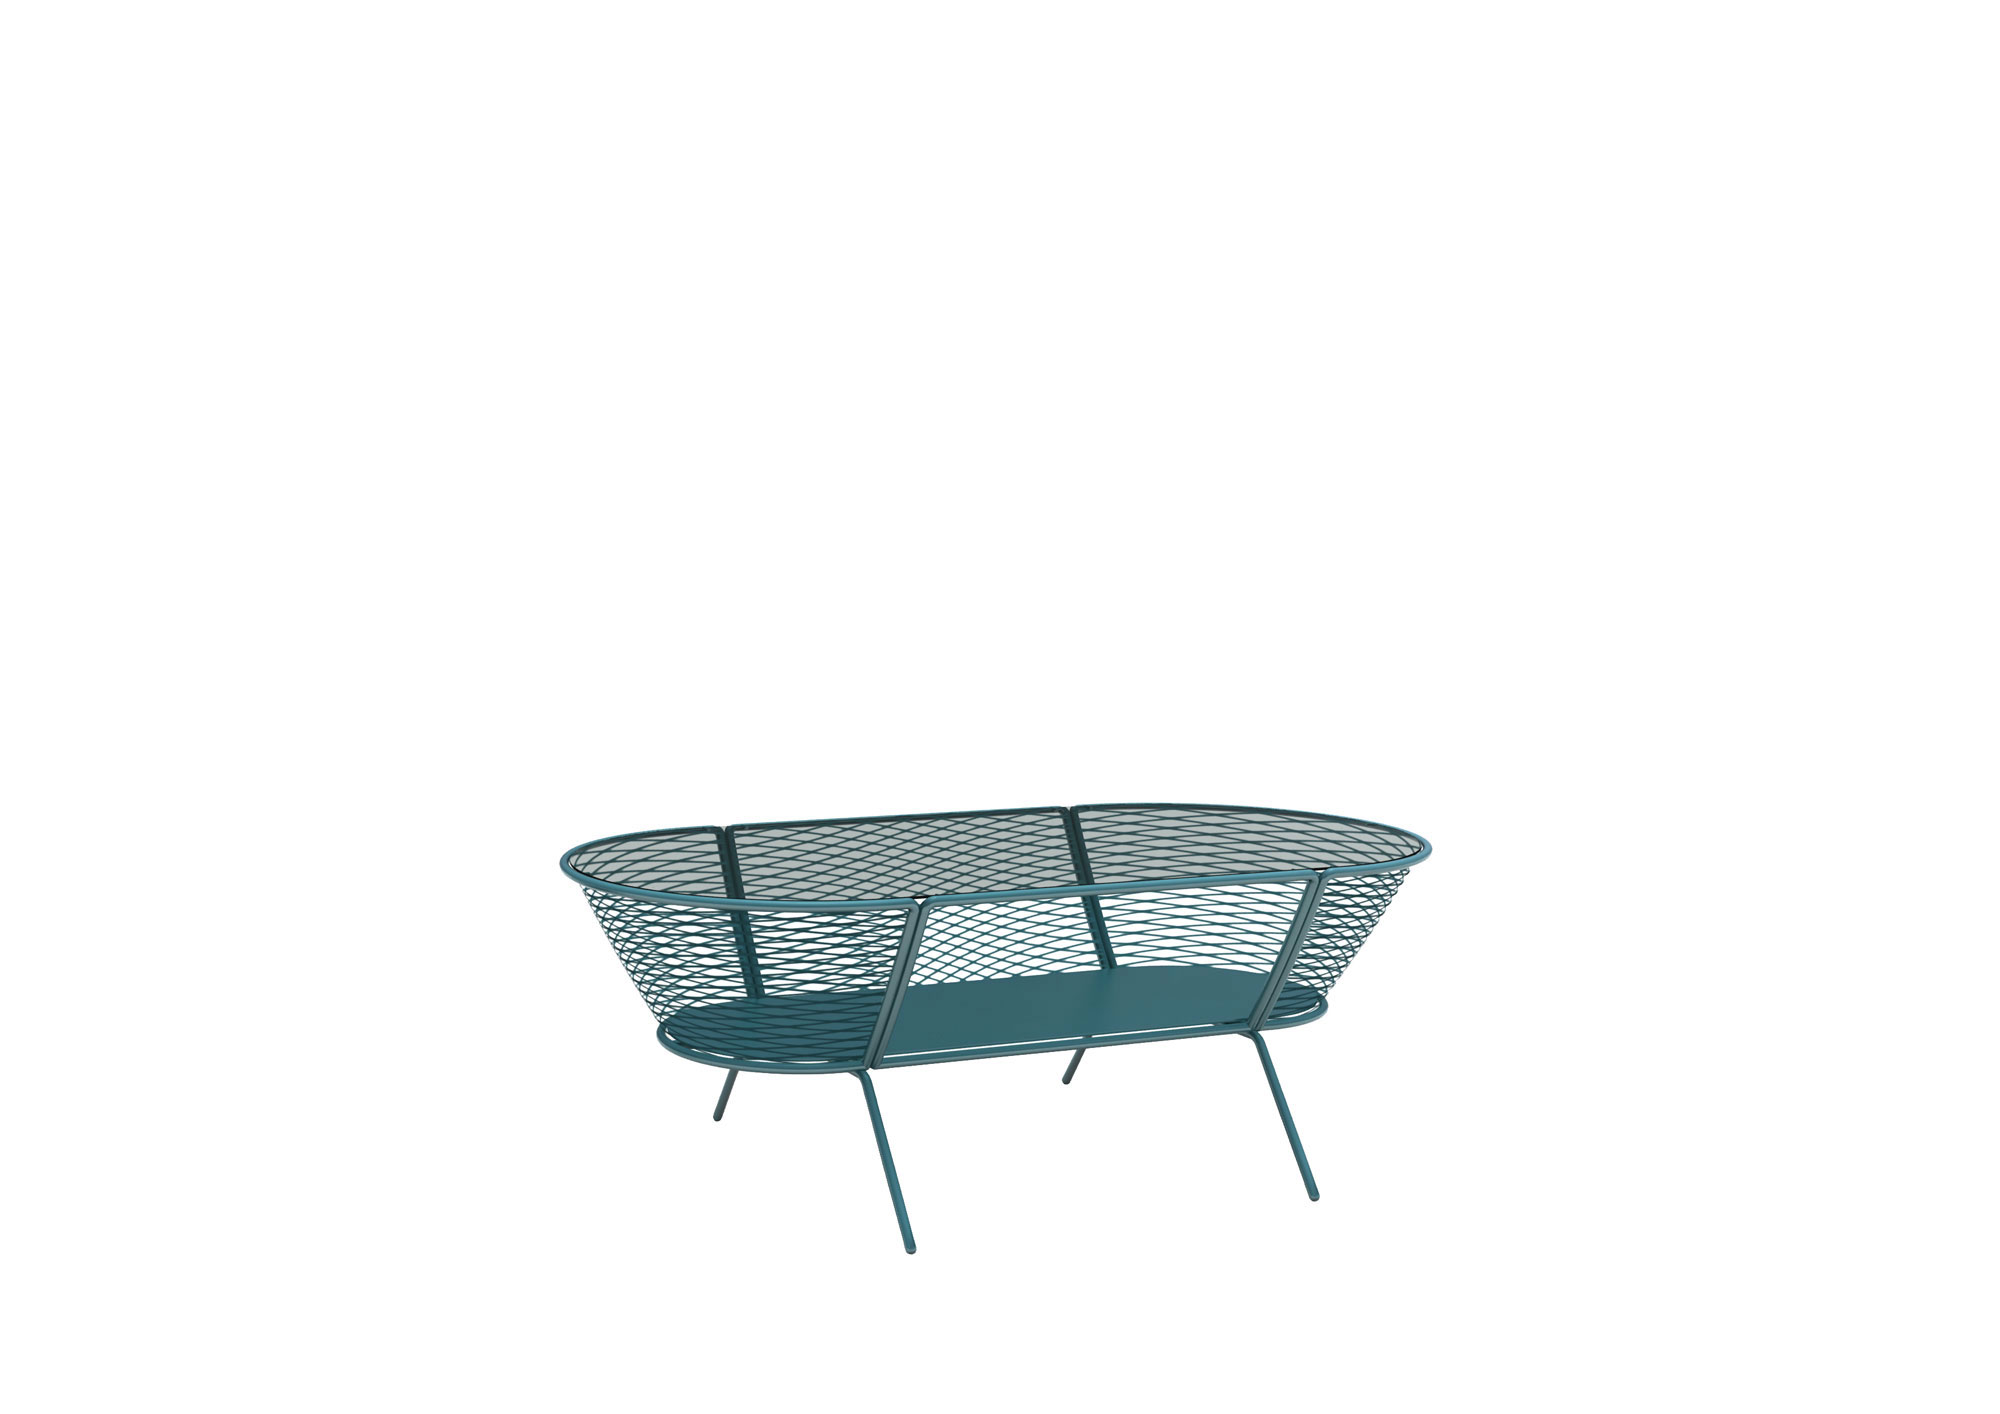 Low oval coffee table for outdoor by Altek Italia Design